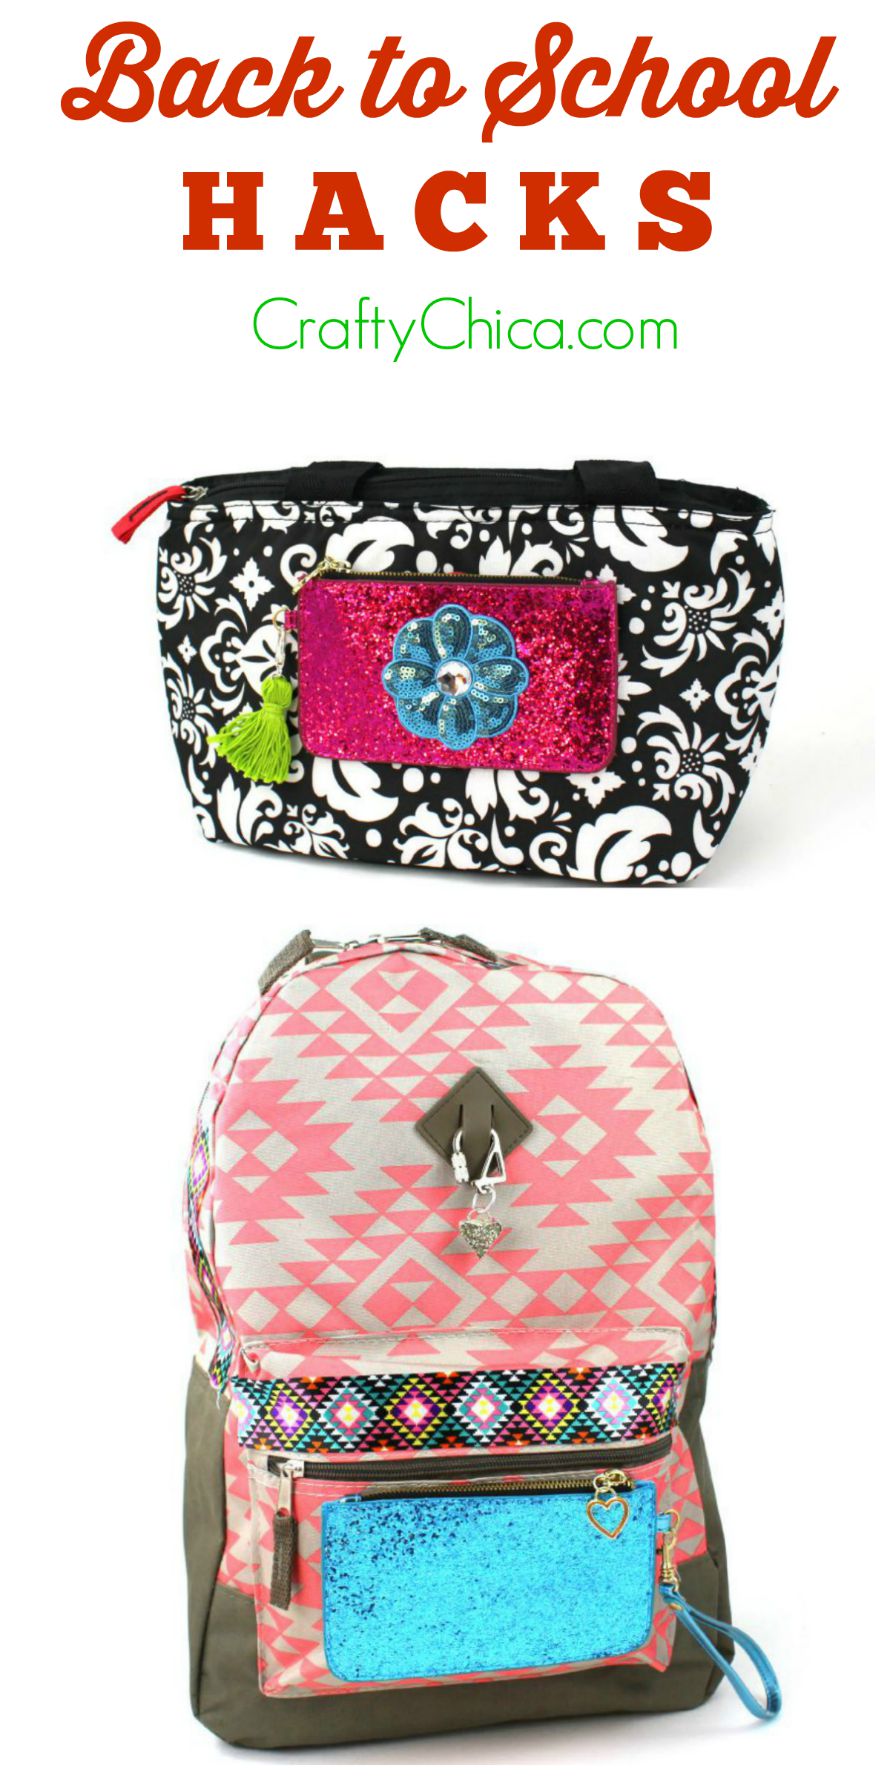 Backpacks hacks for back to school: Use hot glue and fabric tape to add a coin purse and trim! CraftyChica.com.